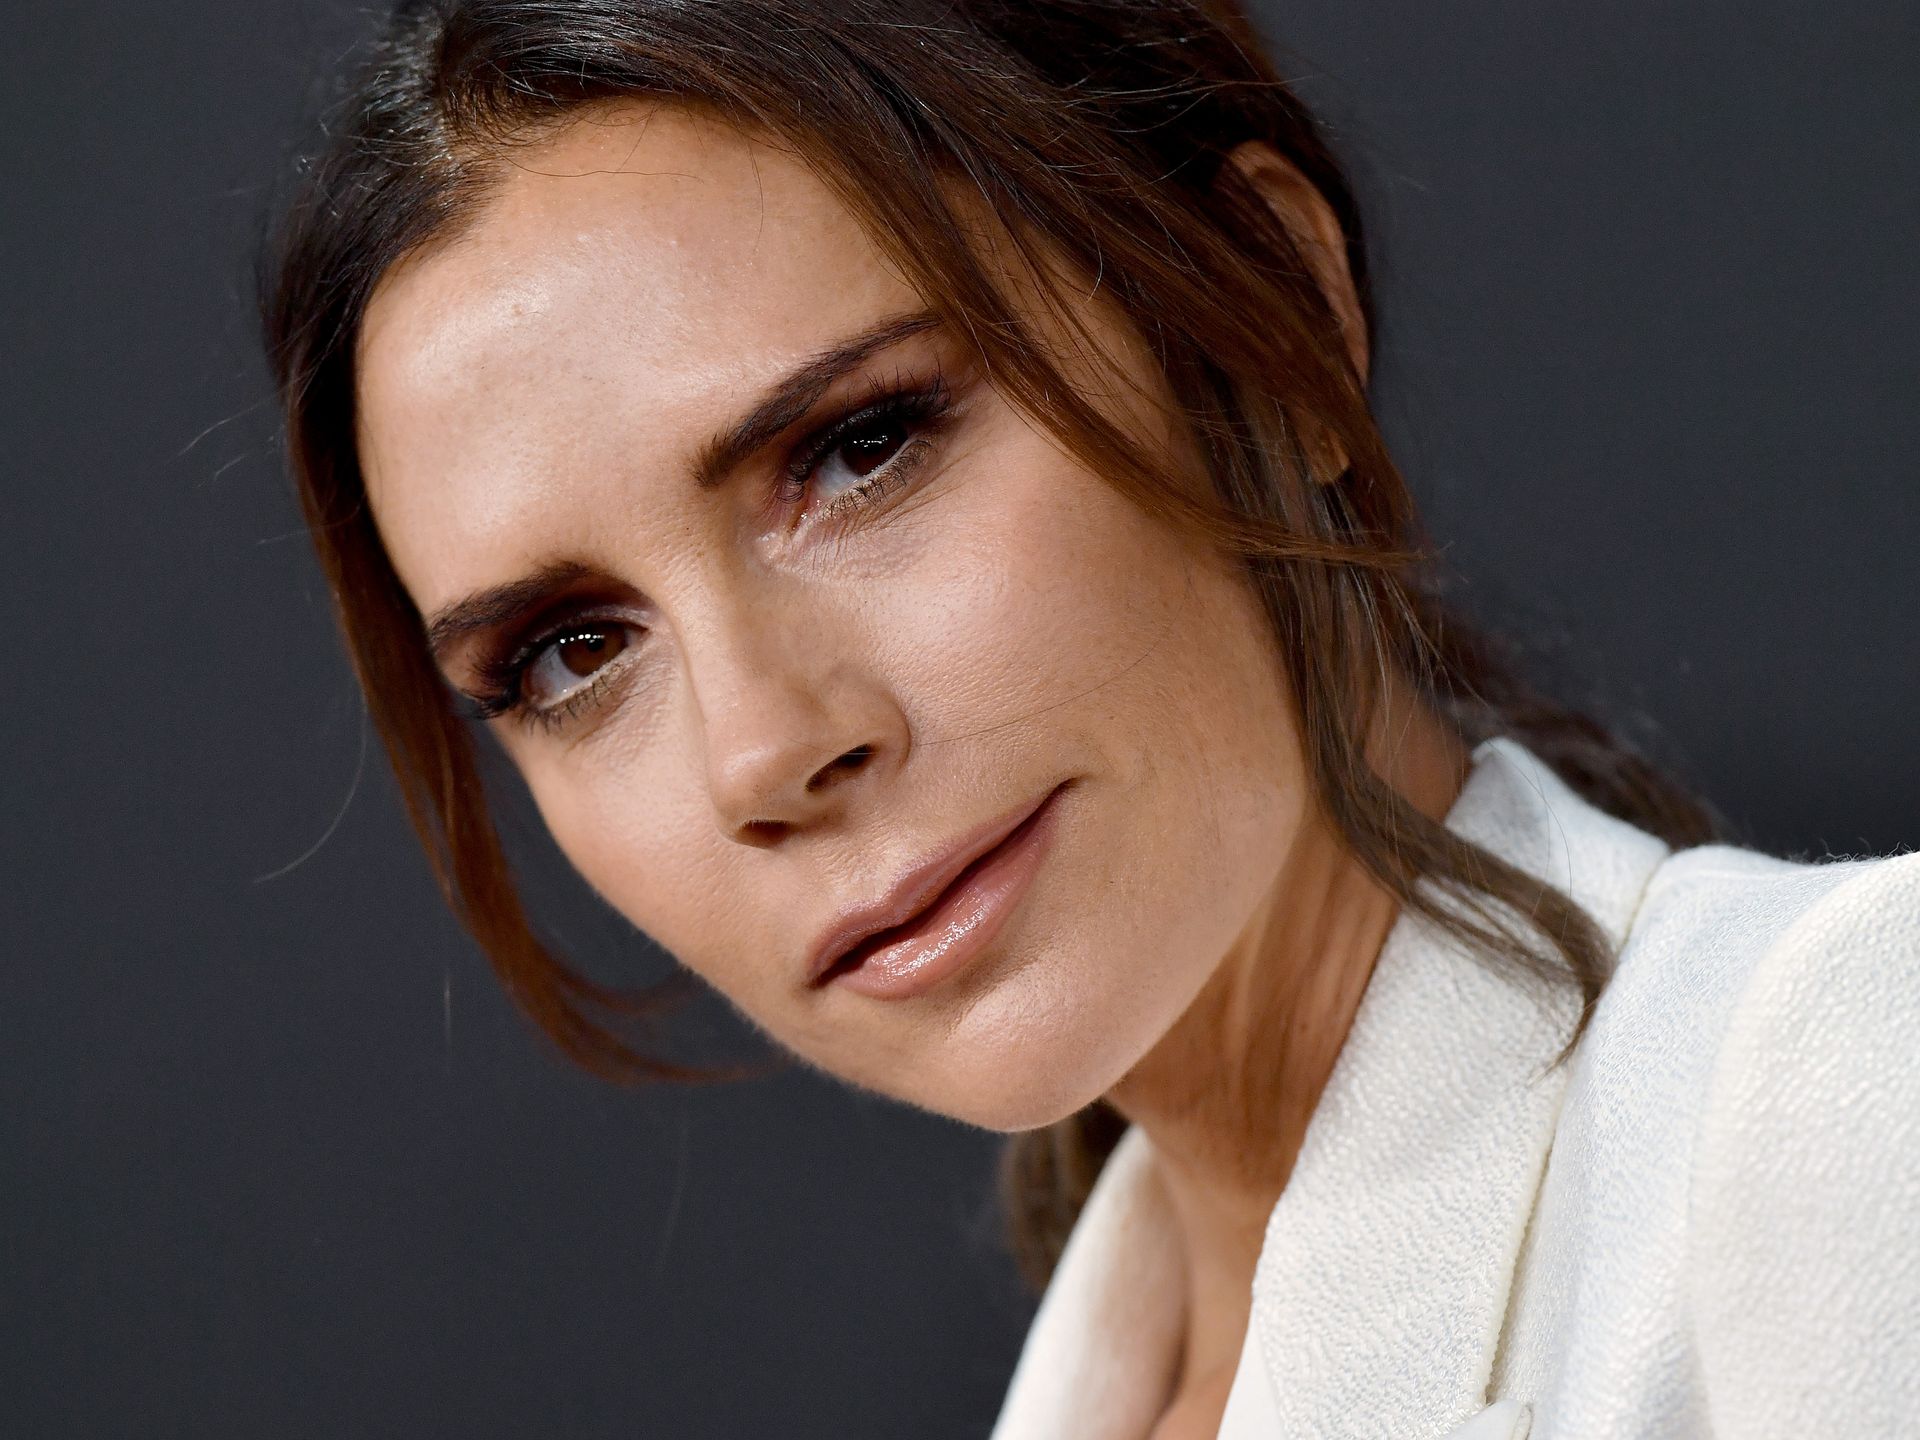 Victoria Beckham's unusual baggy trousers prove she's a fashion